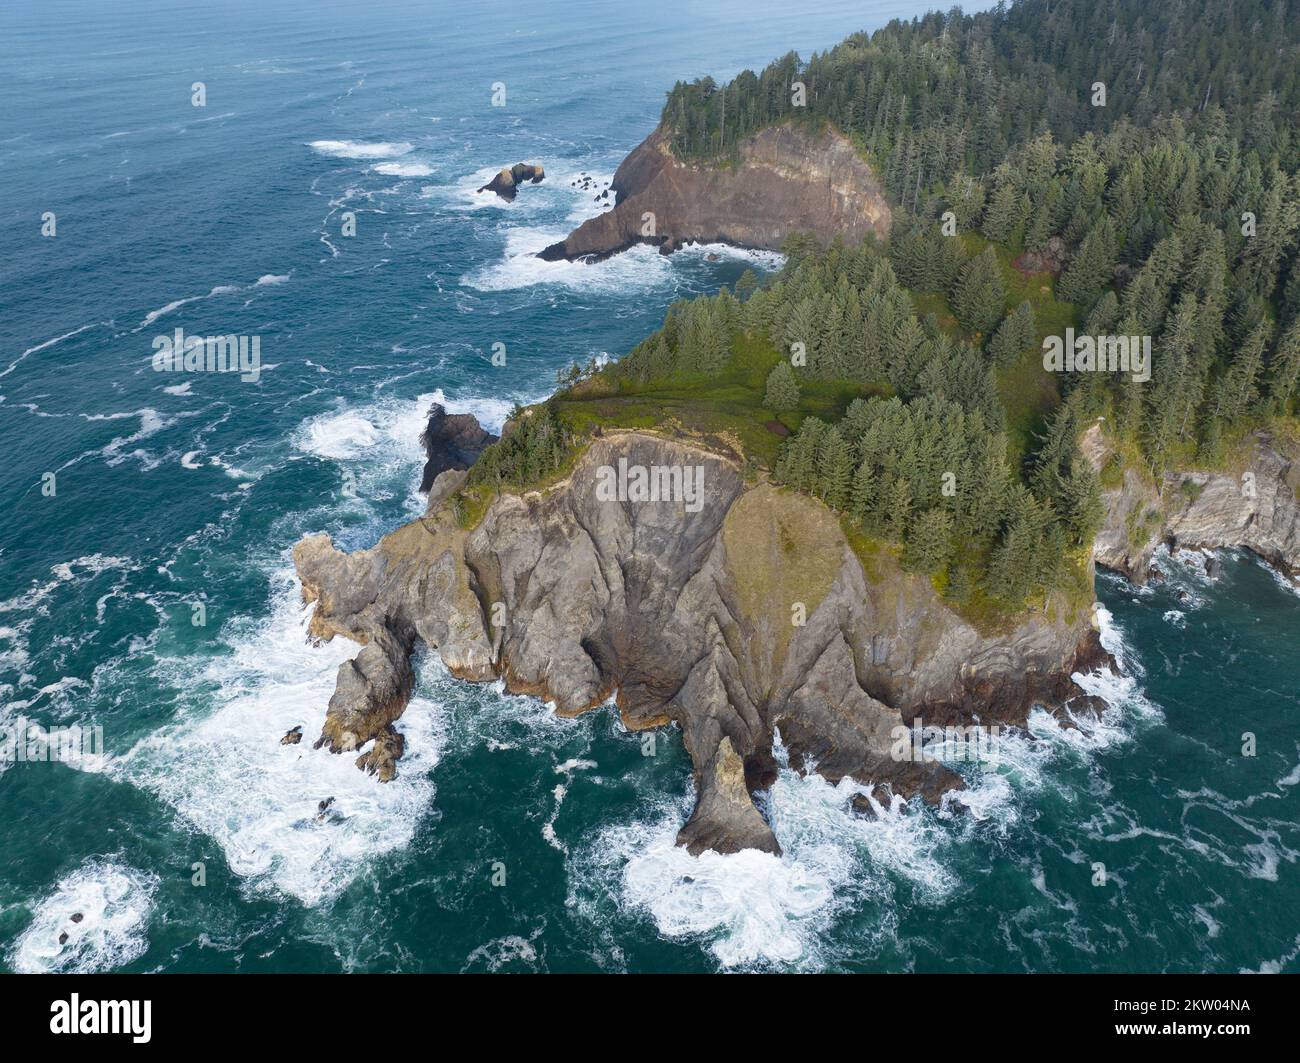 The cold Pacific Ocean washes against the rugged coastline of northern Oregon. This Pacific Northwest is known for its spectacular outdoor scenery. Stock Photo